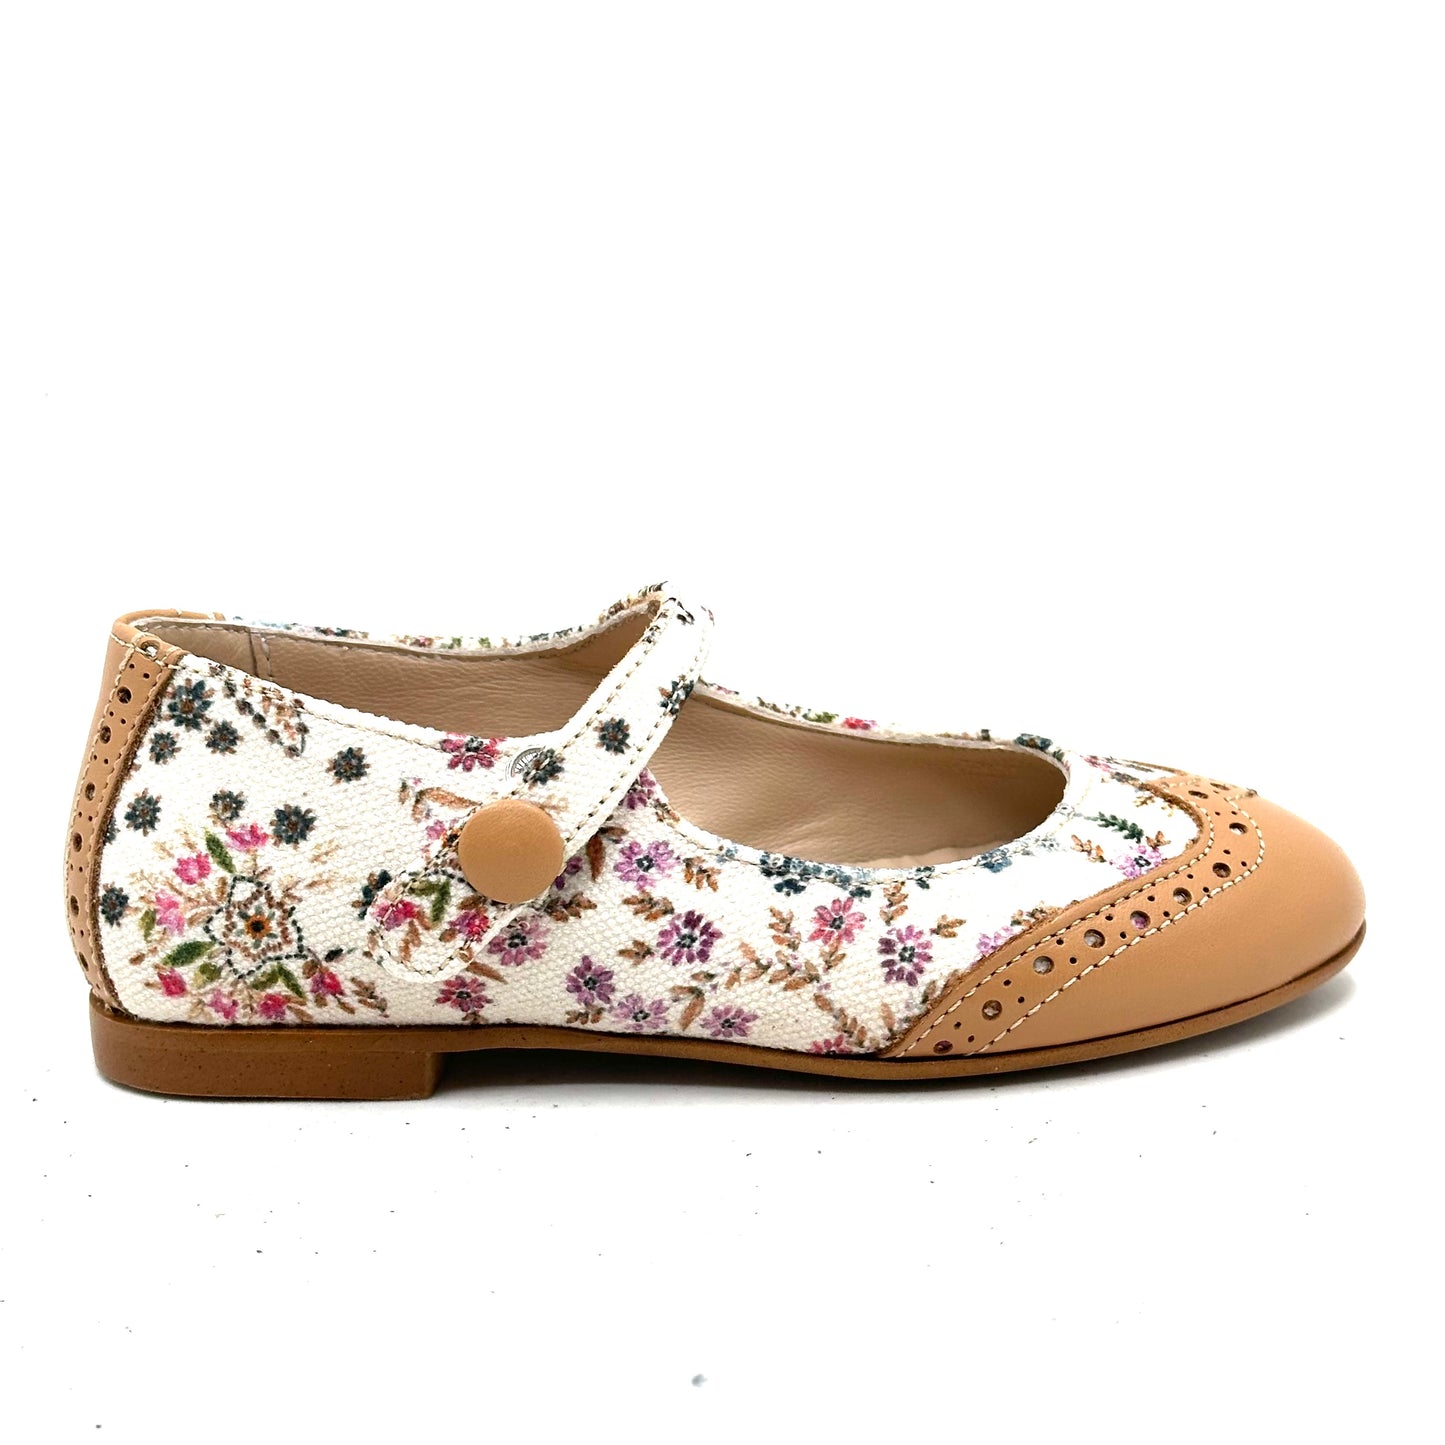 Blublonc White Floral Luggage Wingtip Mary Jane